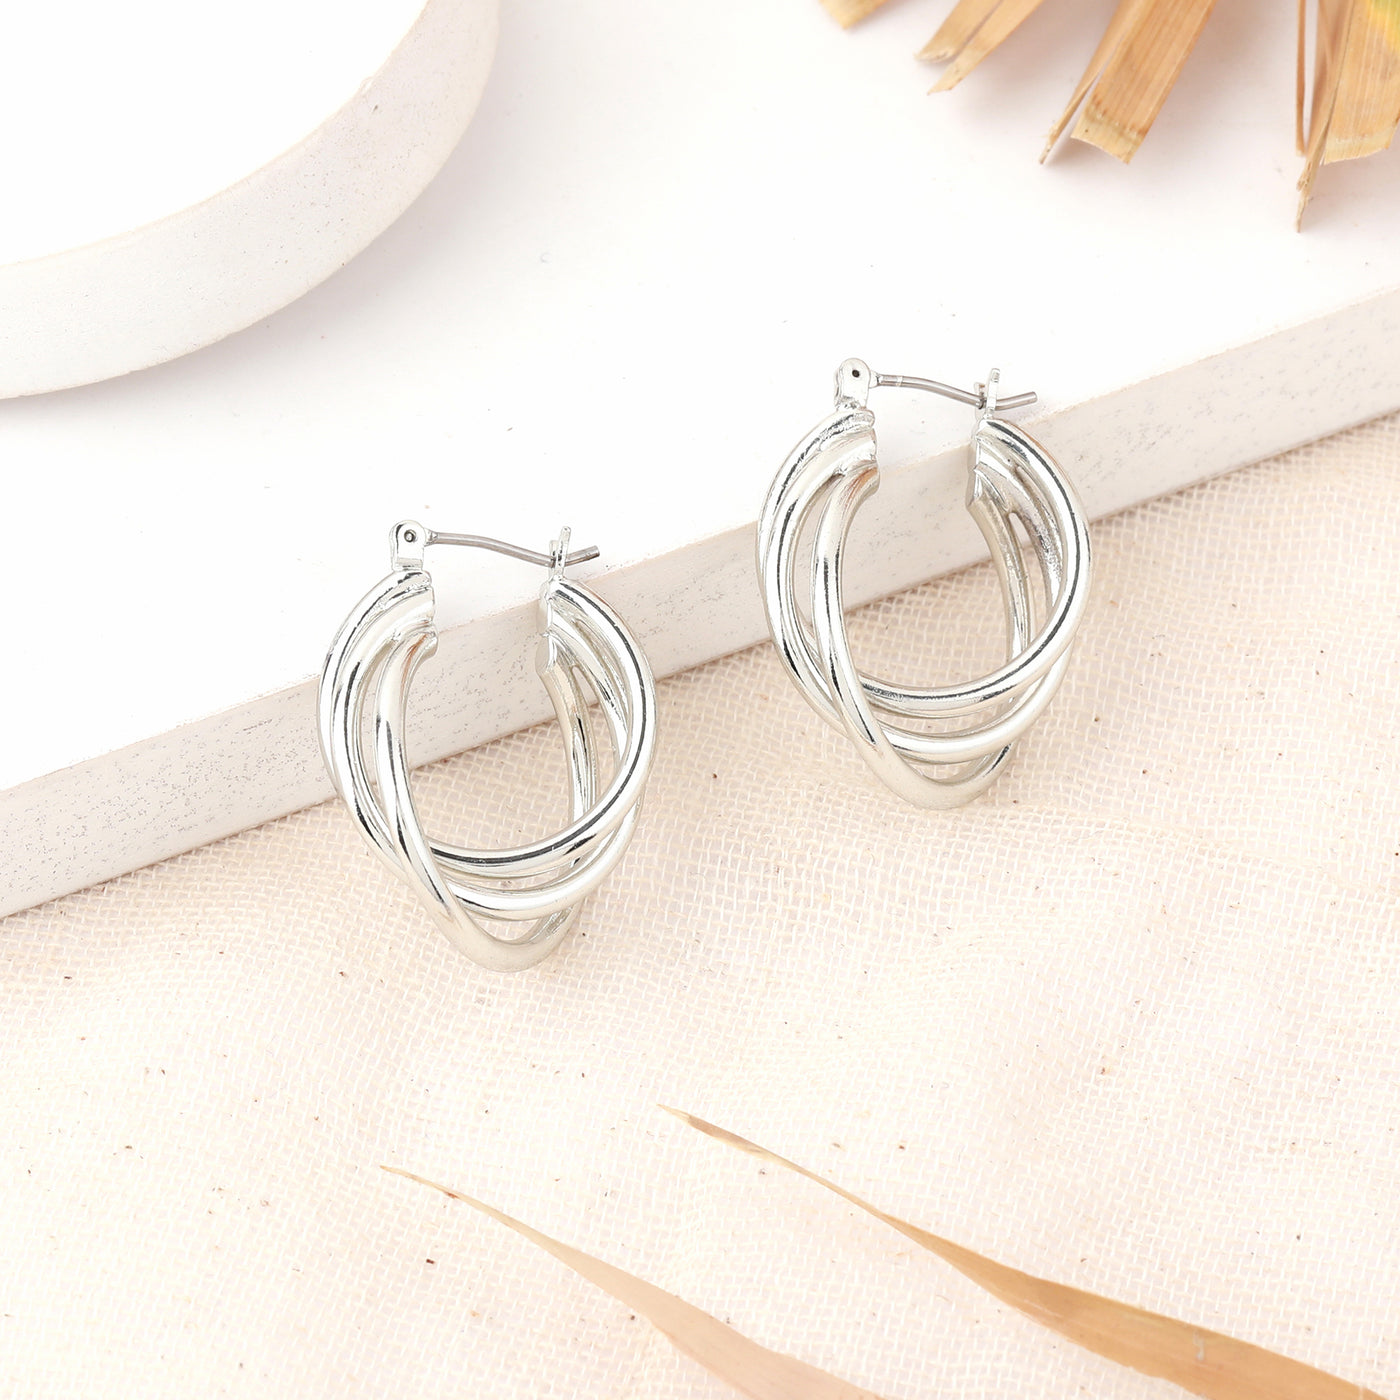 Estele Fashion Earrings for Women and Girls Rhodium Plated Twisted Layered Trio Circular Metallic Hoop Earrings Party/Office Wear for Girls and Women